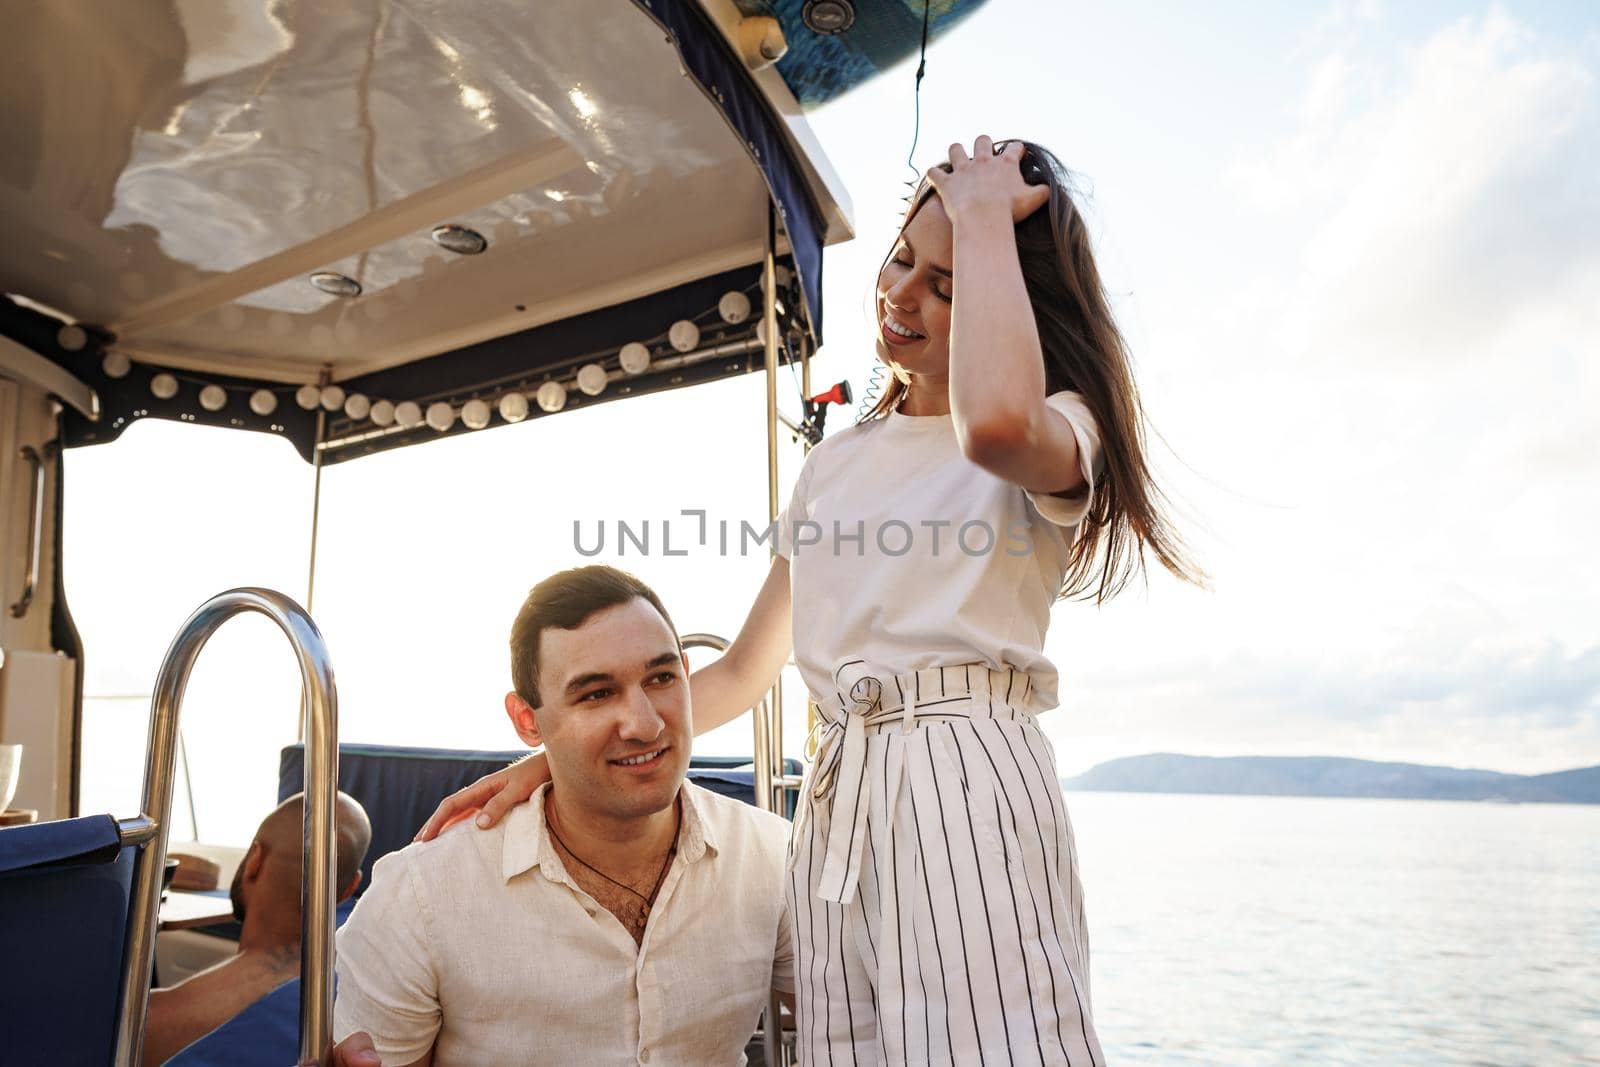 Loving couple spending time on a yacht at the open sea